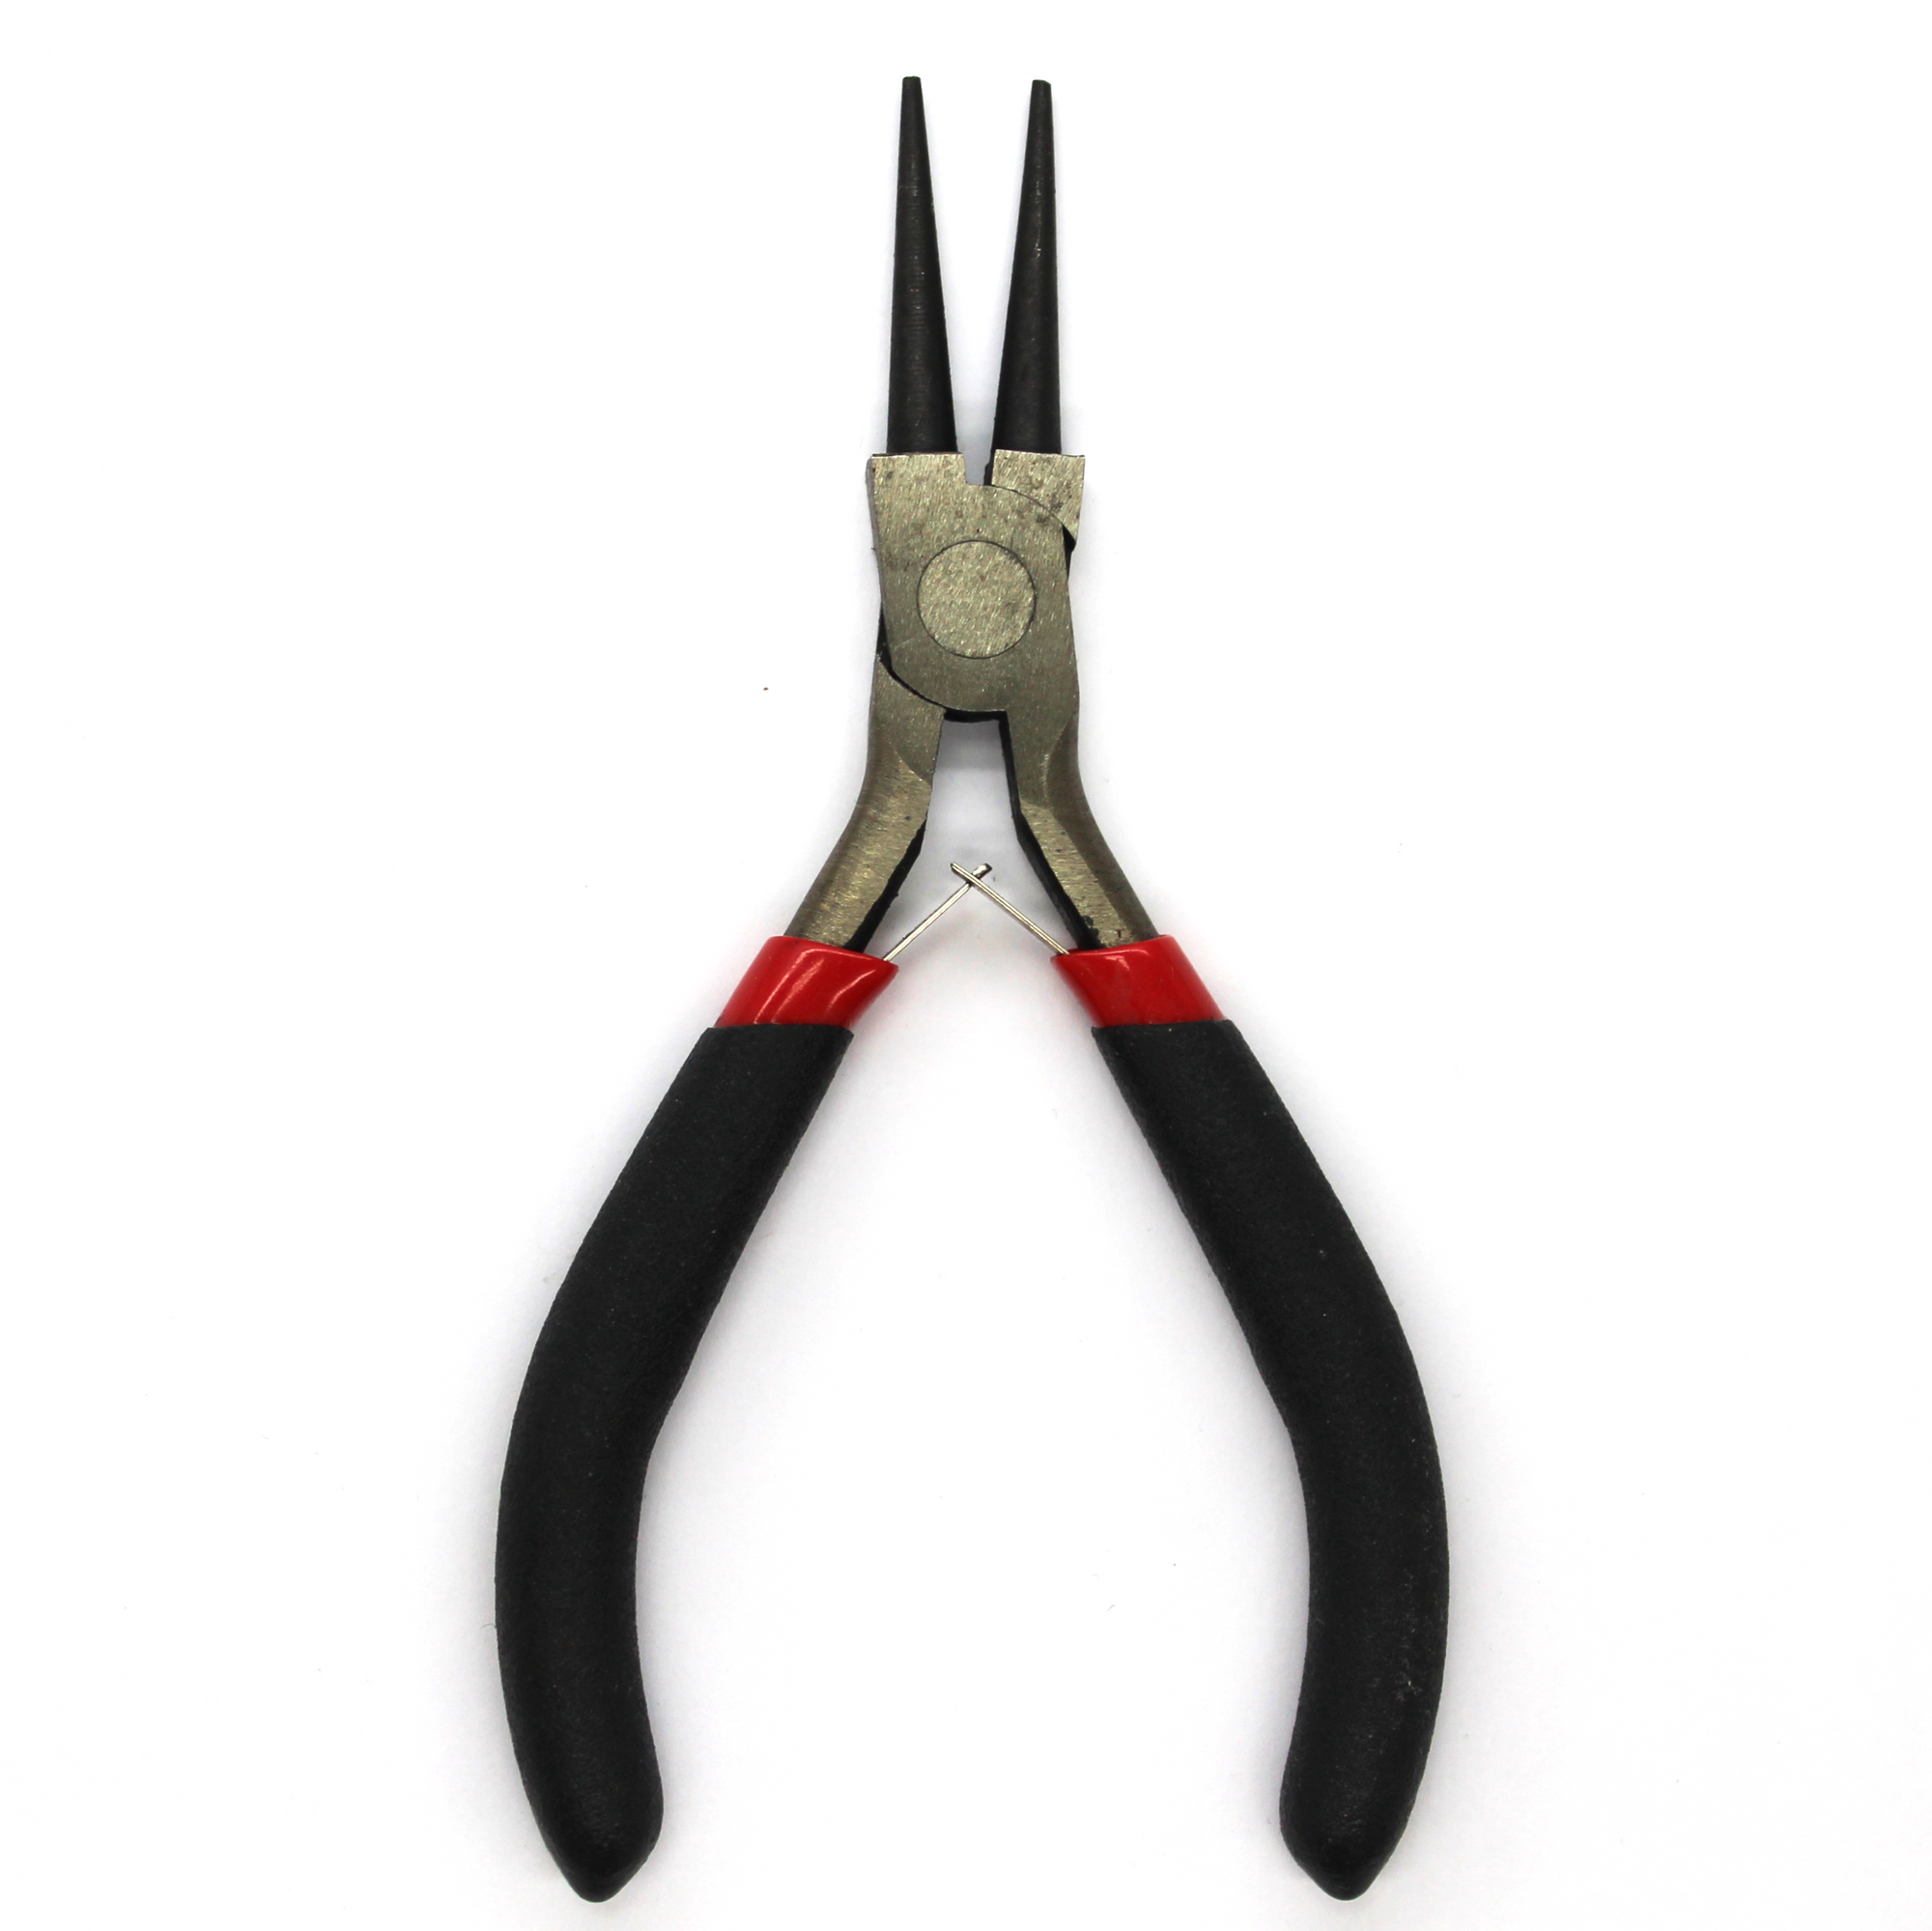 Tools, Pliers, Round Nose, Steel, 4.6 inches - 1 pc